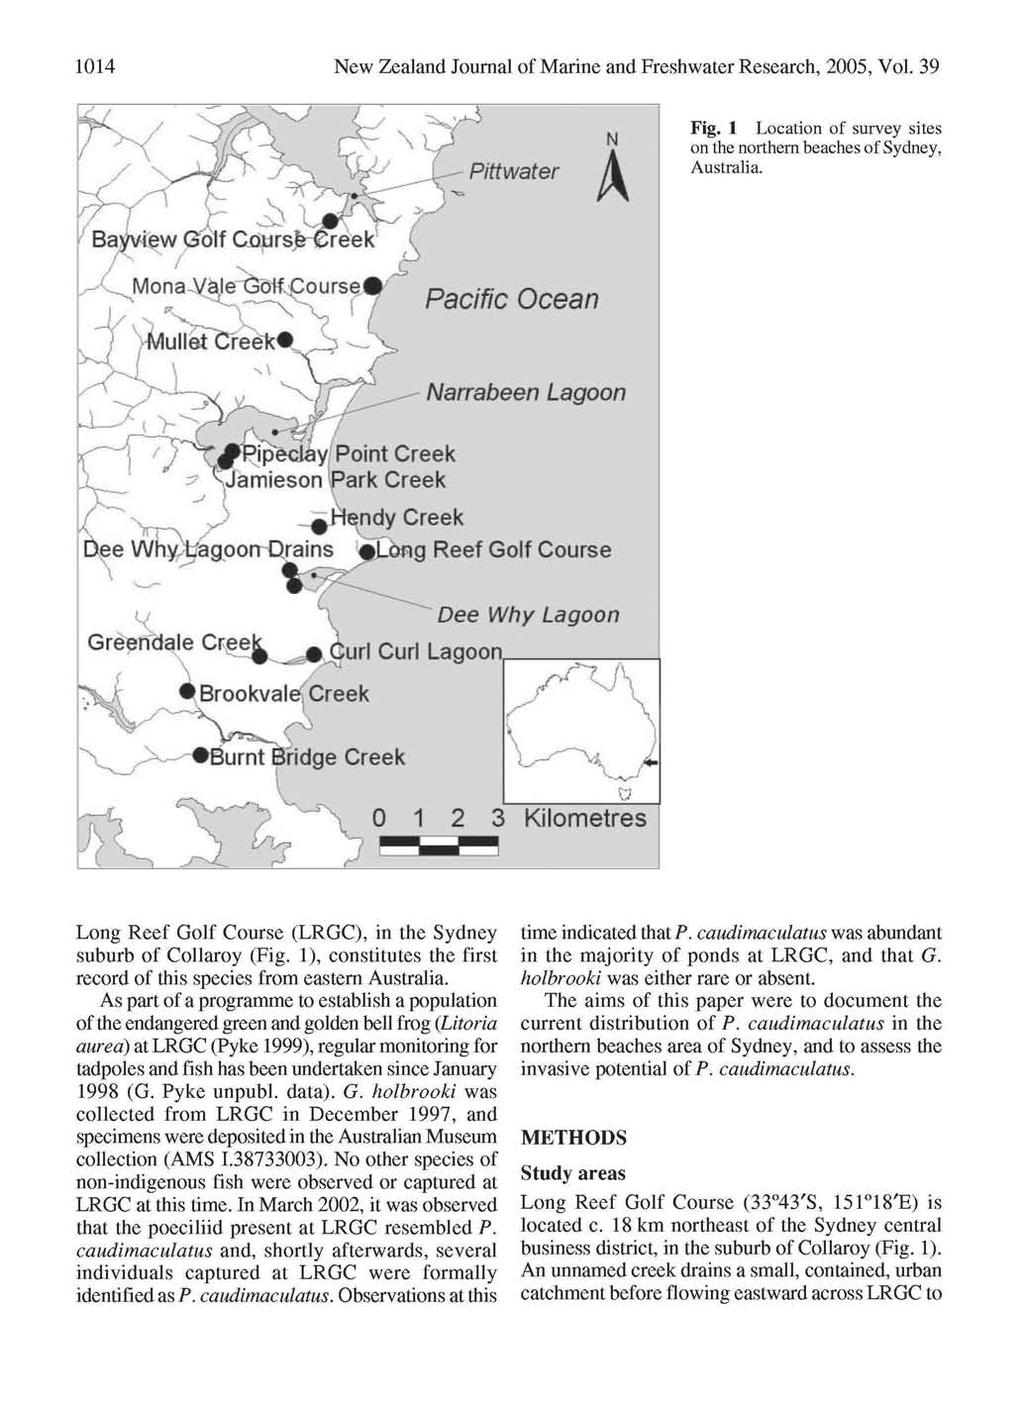 114 New Zealand Journal of Marine and Freshwater Research, 2, Vol. 39 Fig. 1 Location of survey sites on the northern beaches of Sydney, Australia.